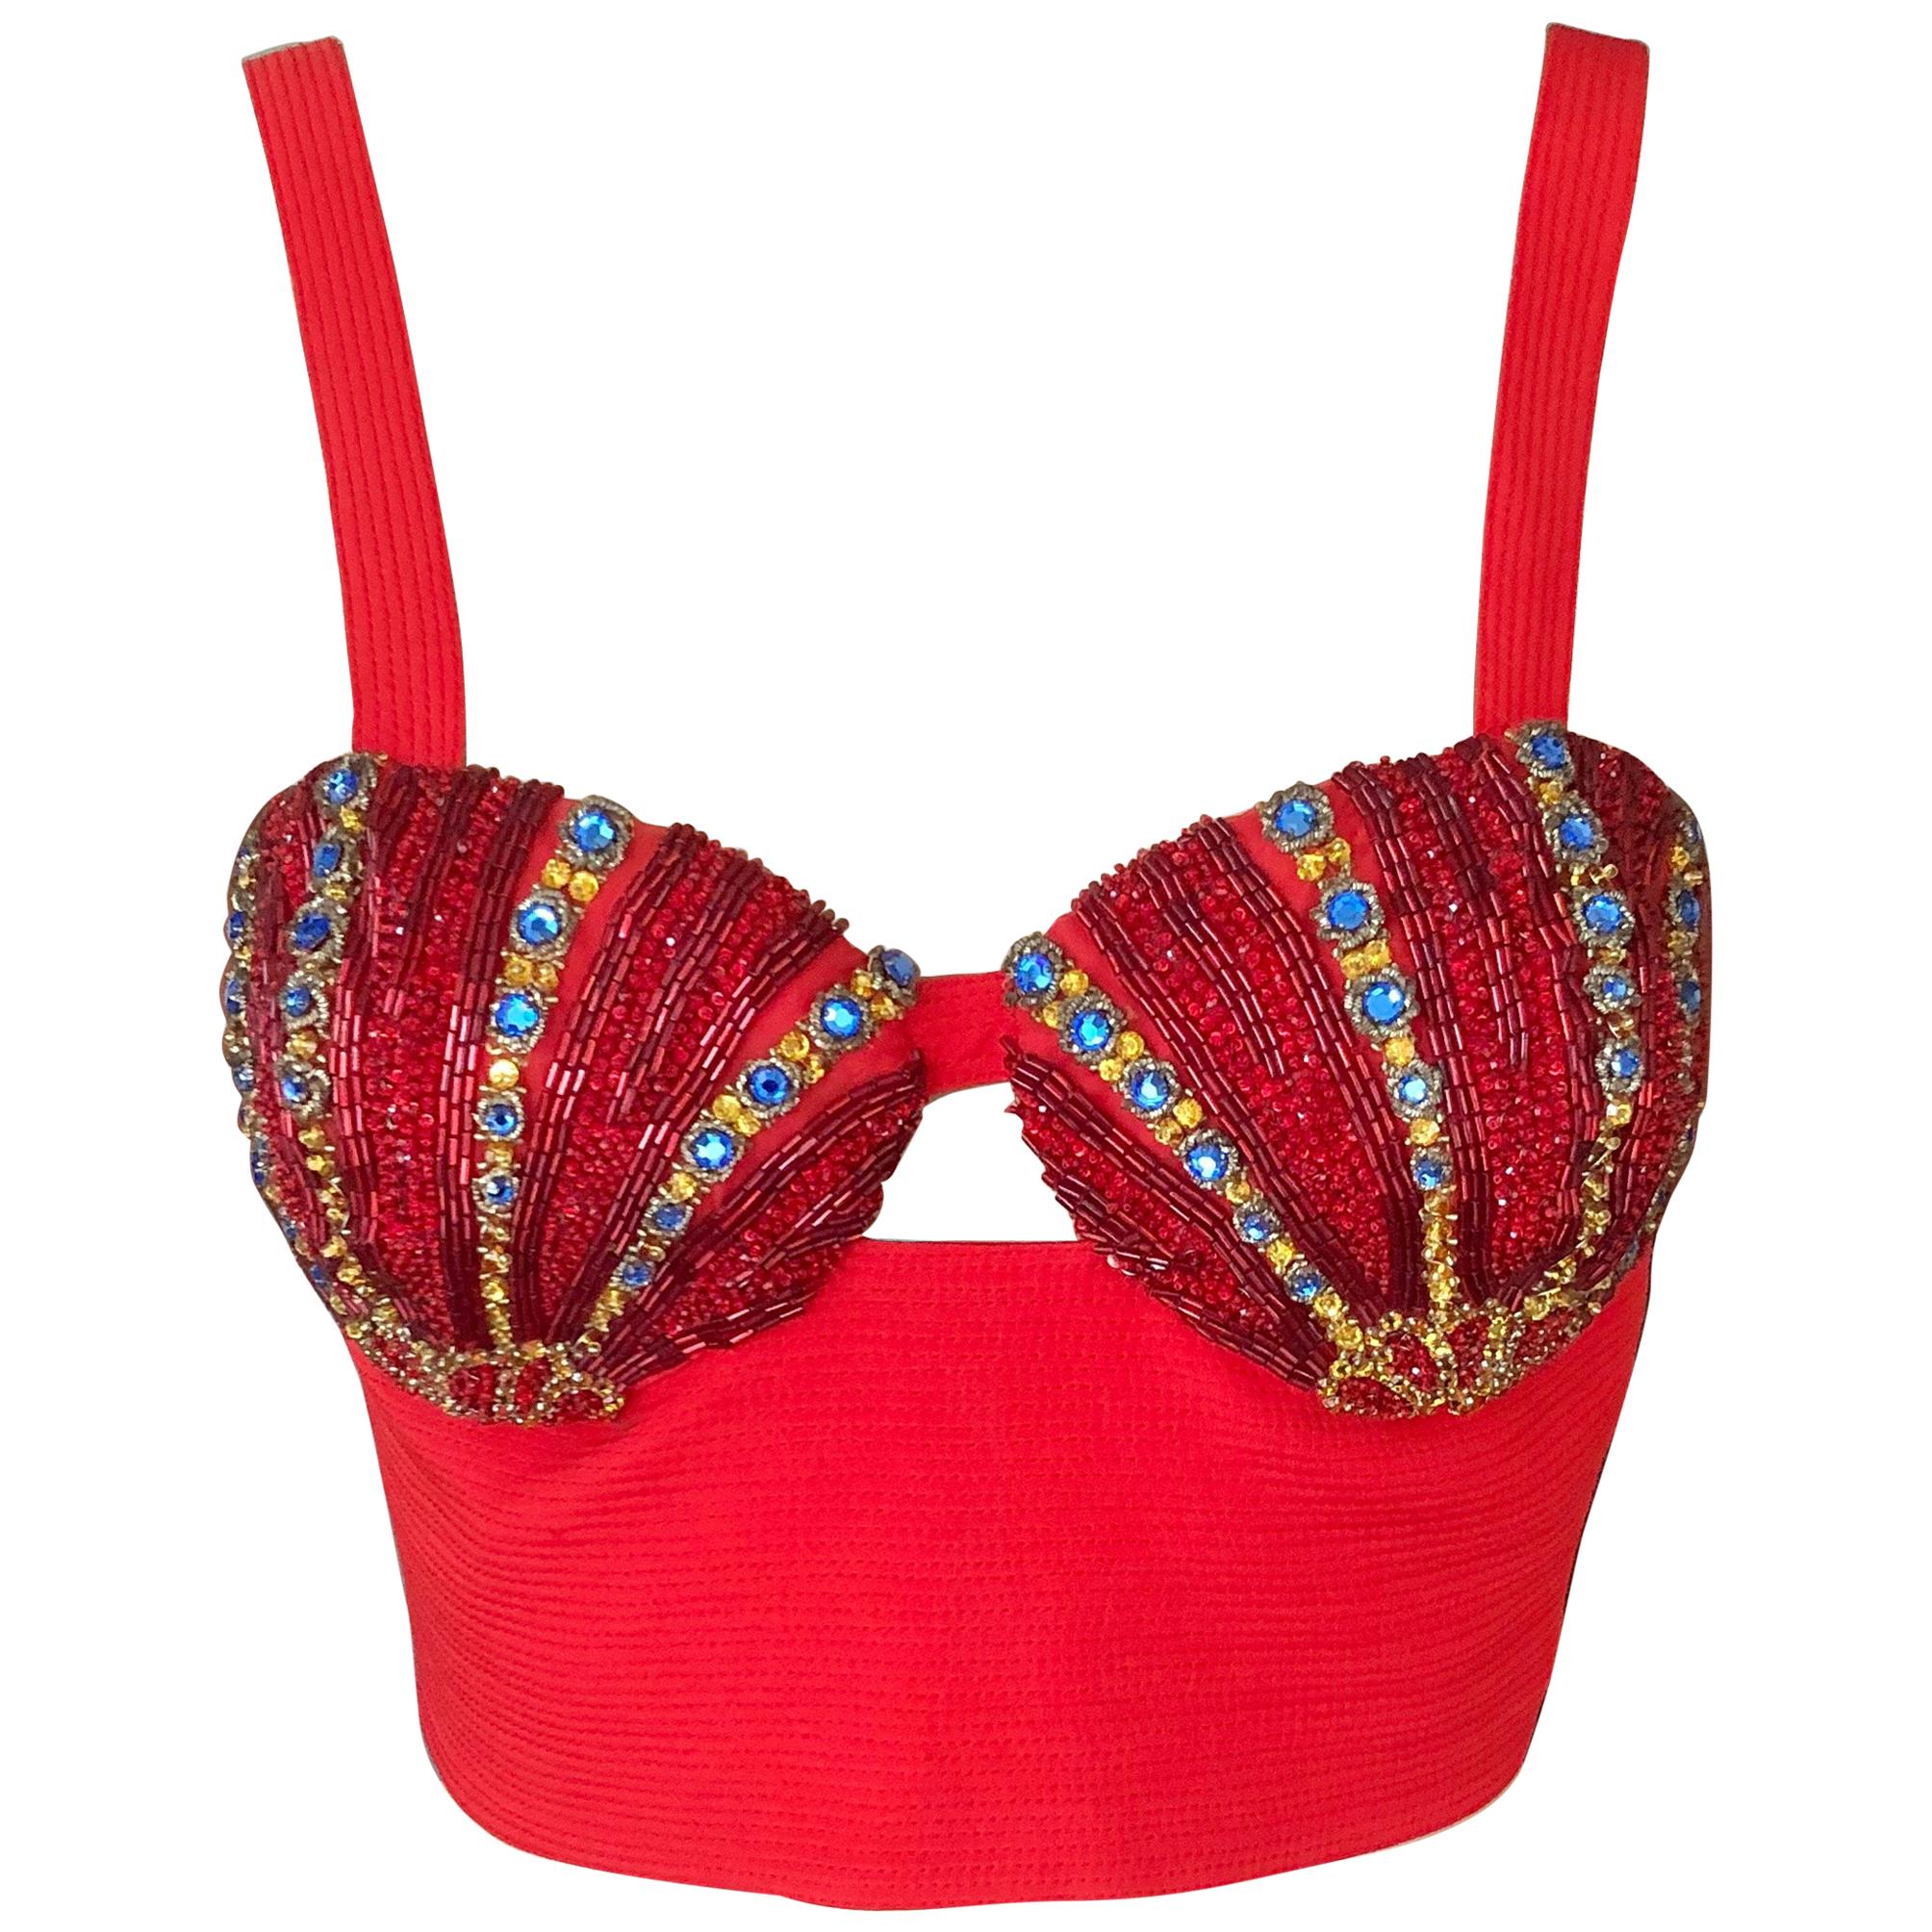 Gianni Versace S/S 1992 Couture Vintage Embellished Bustier Bra Crop Top 